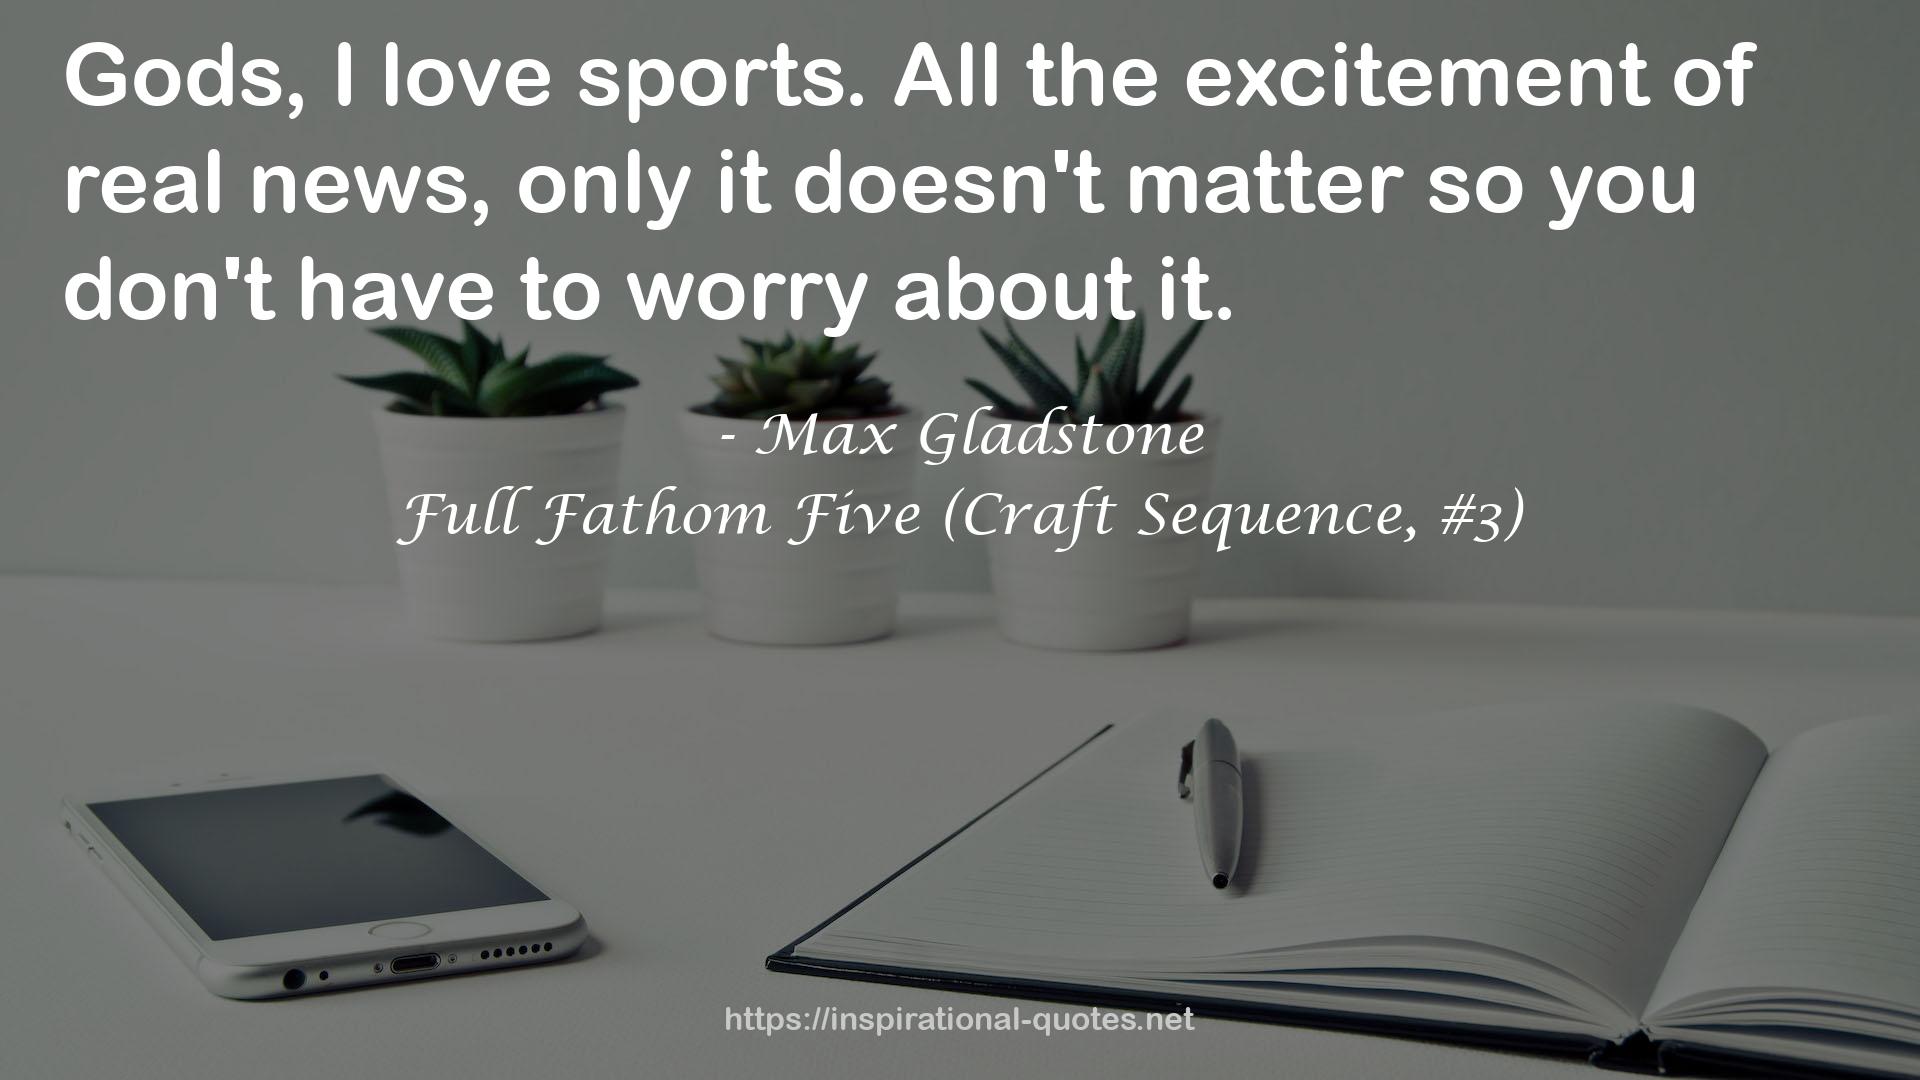 Full Fathom Five (Craft Sequence, #3) QUOTES